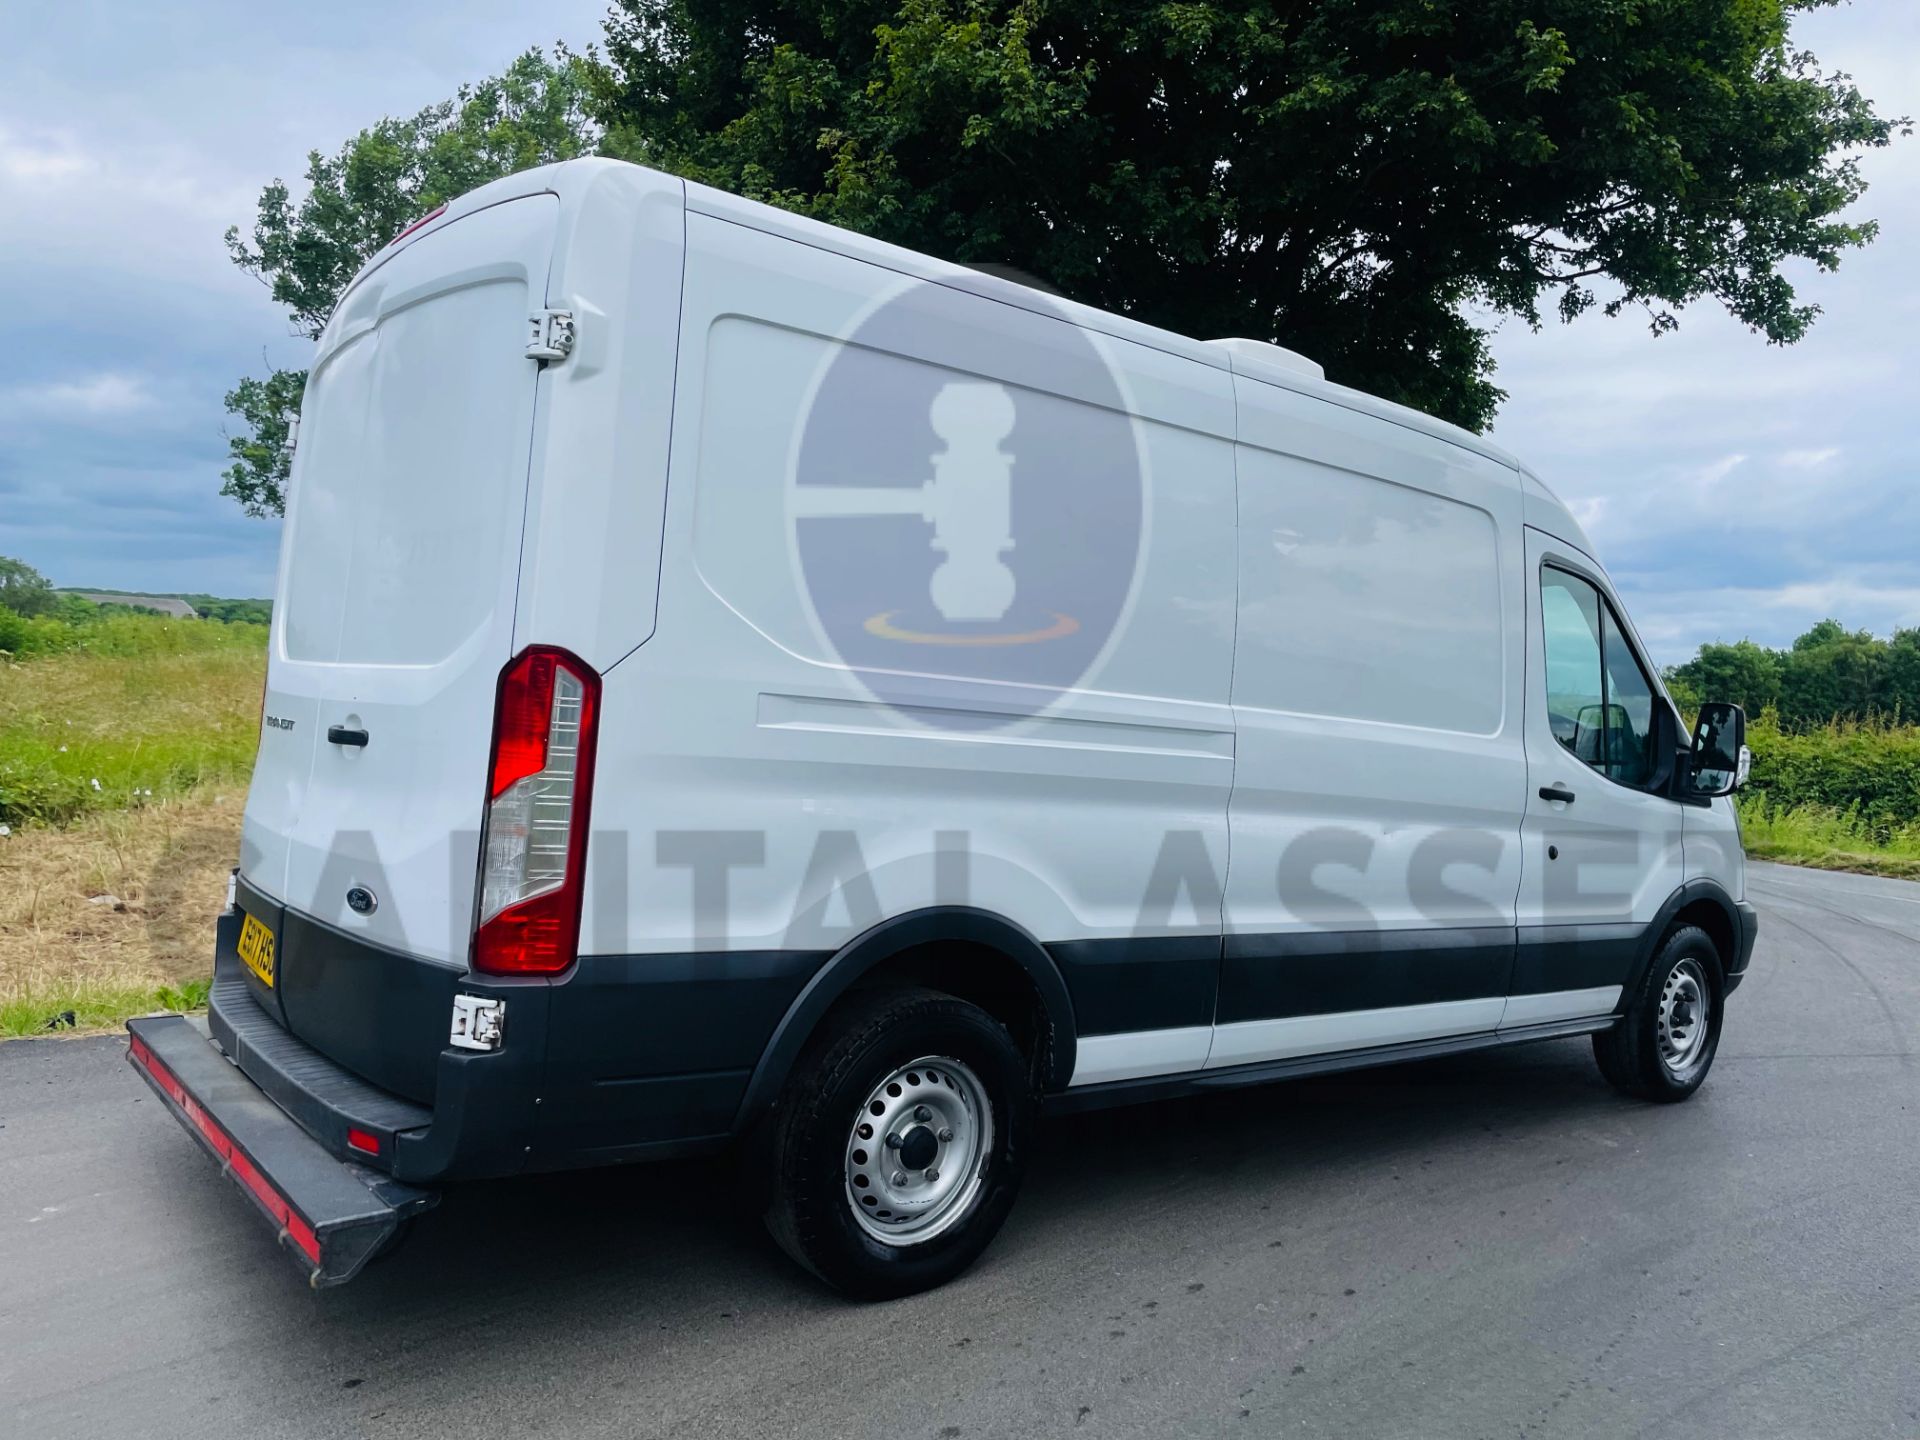 (On Sale) FORD TRANSIT 130 T350 *LWB -REFRIGERATED VAN* (2017 - EURO 6) 2.0 TDCI 'ECOBLUE' - 6 SPEED - Image 13 of 42